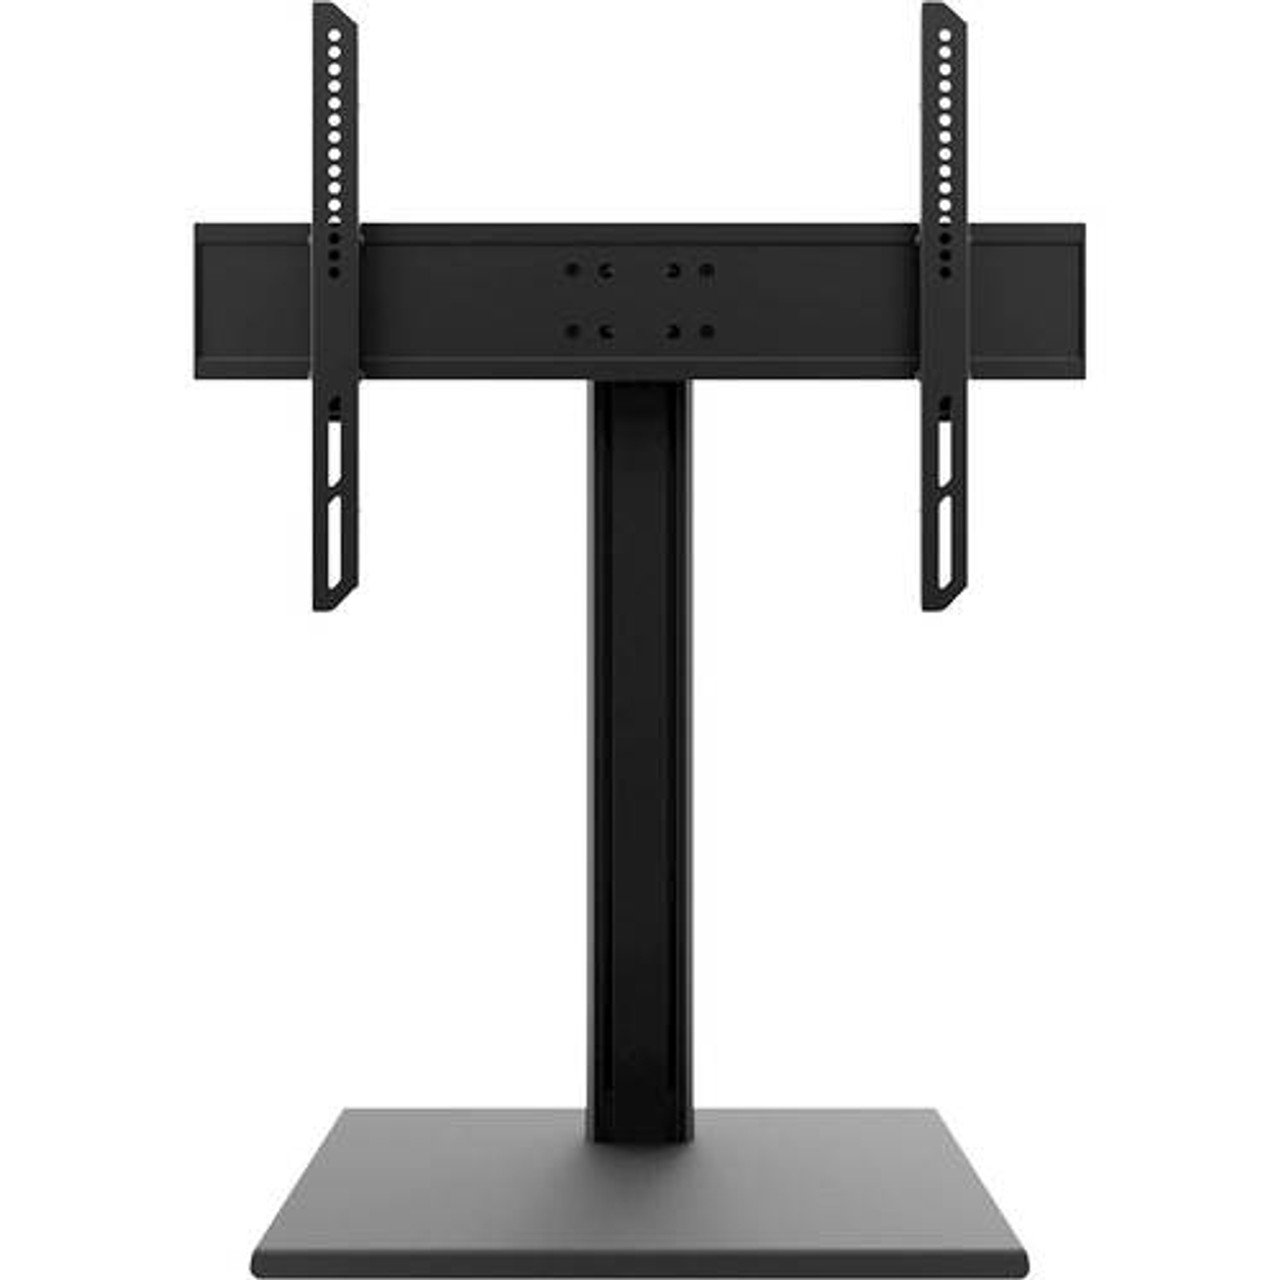 Kanto - TV Stand for Most Flat-Panel TVs Up to 60" - Black